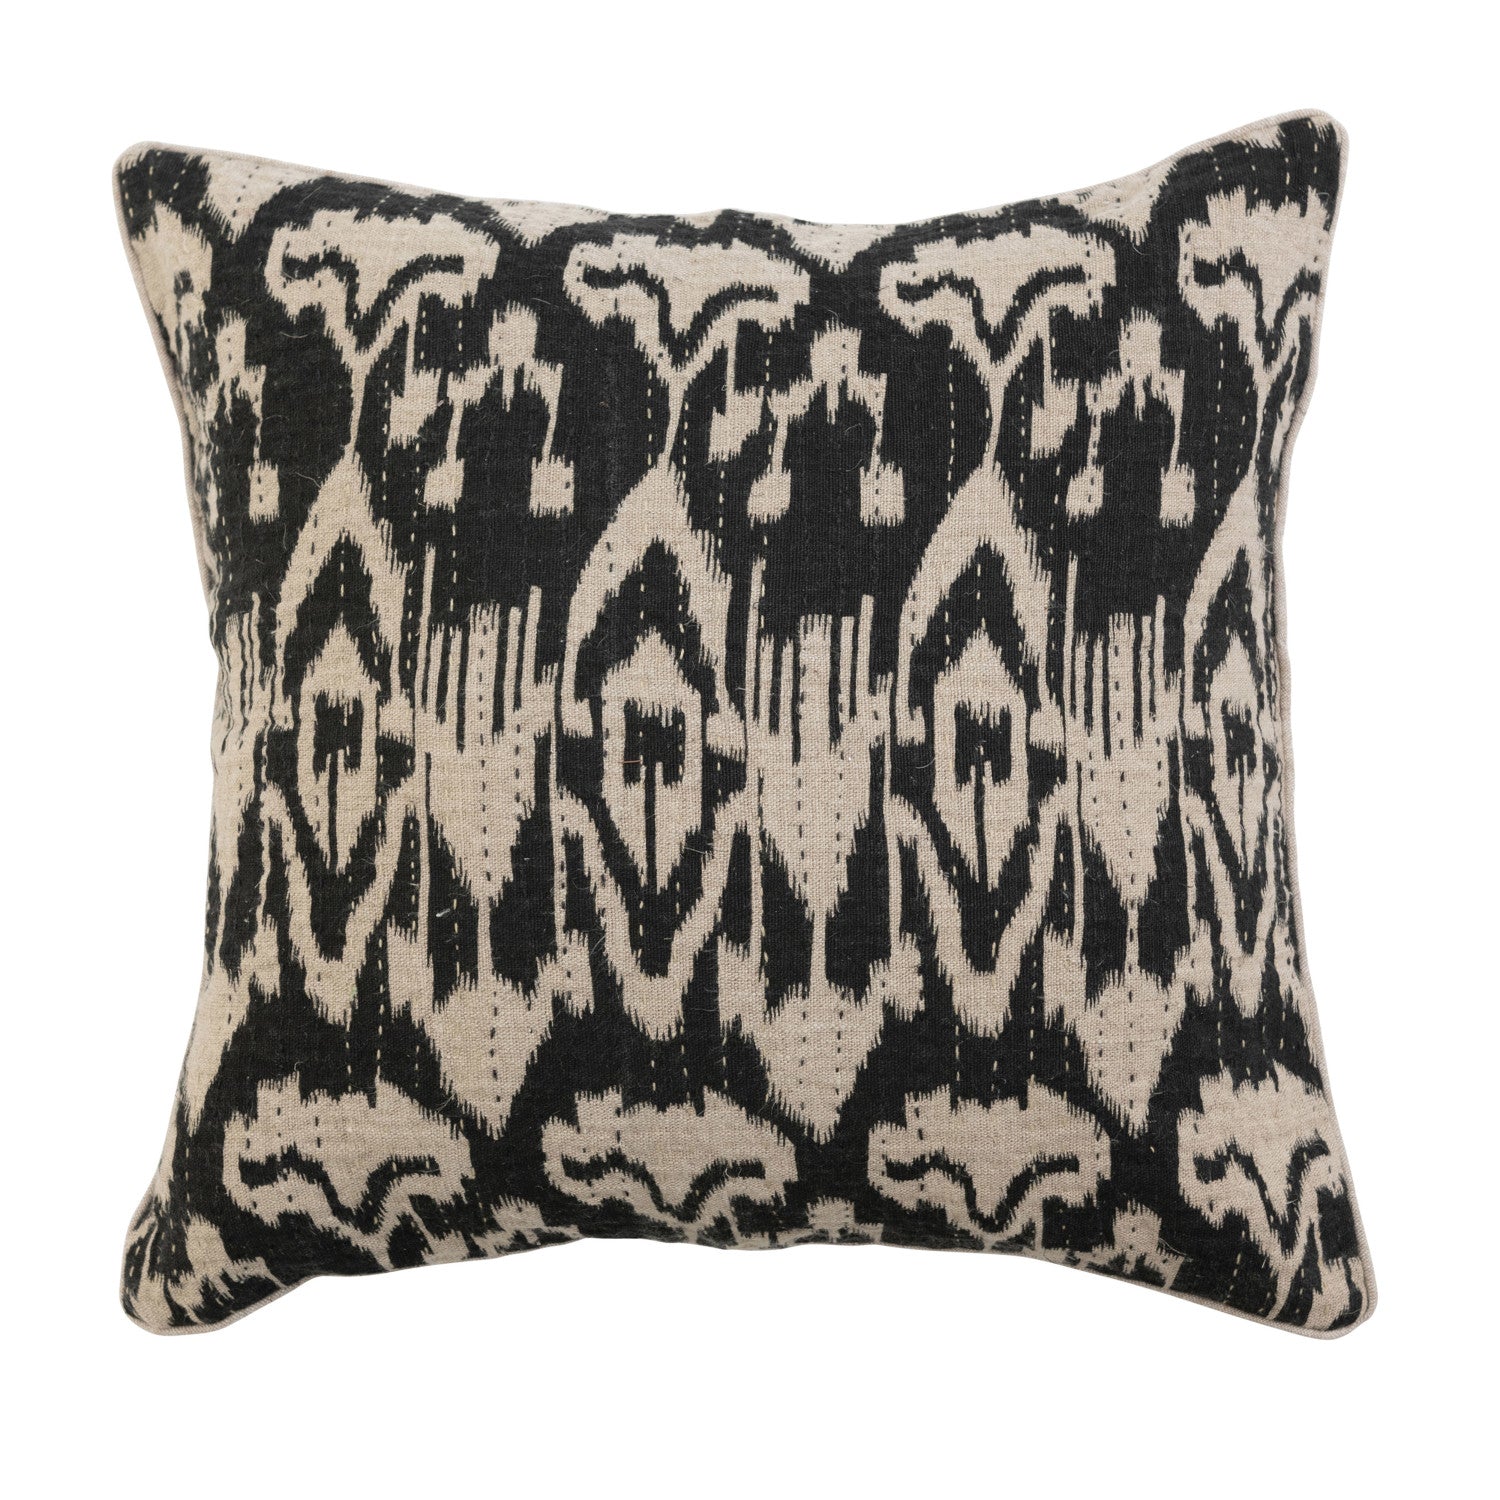 Pillow w/ Ikat Embroidery